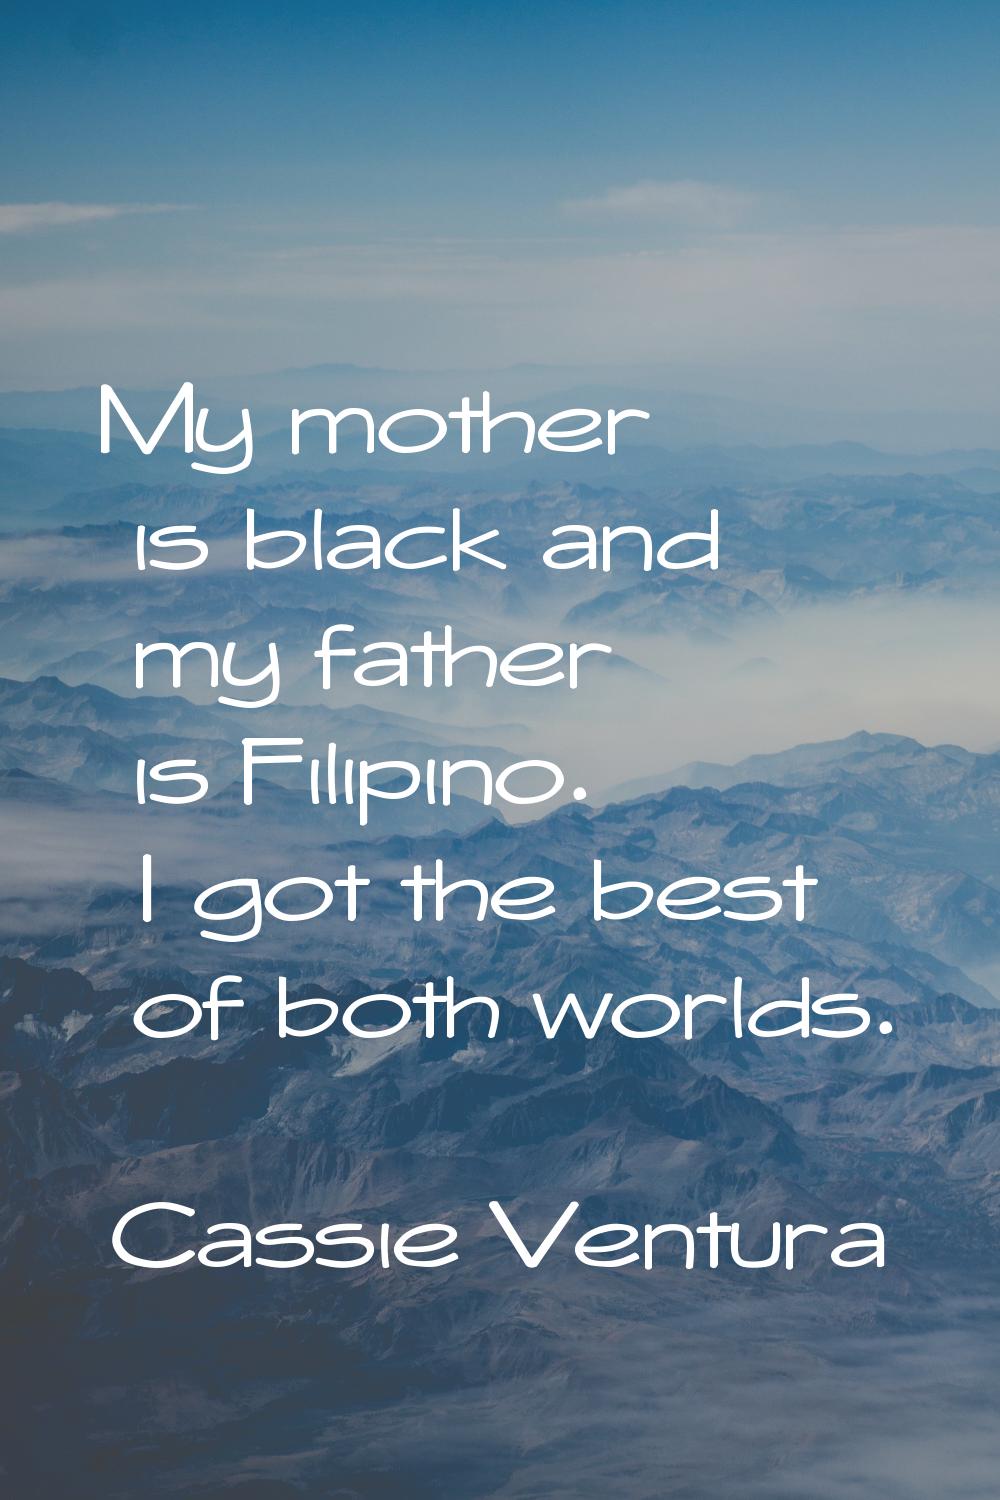 My mother is black and my father is Filipino. I got the best of both worlds.